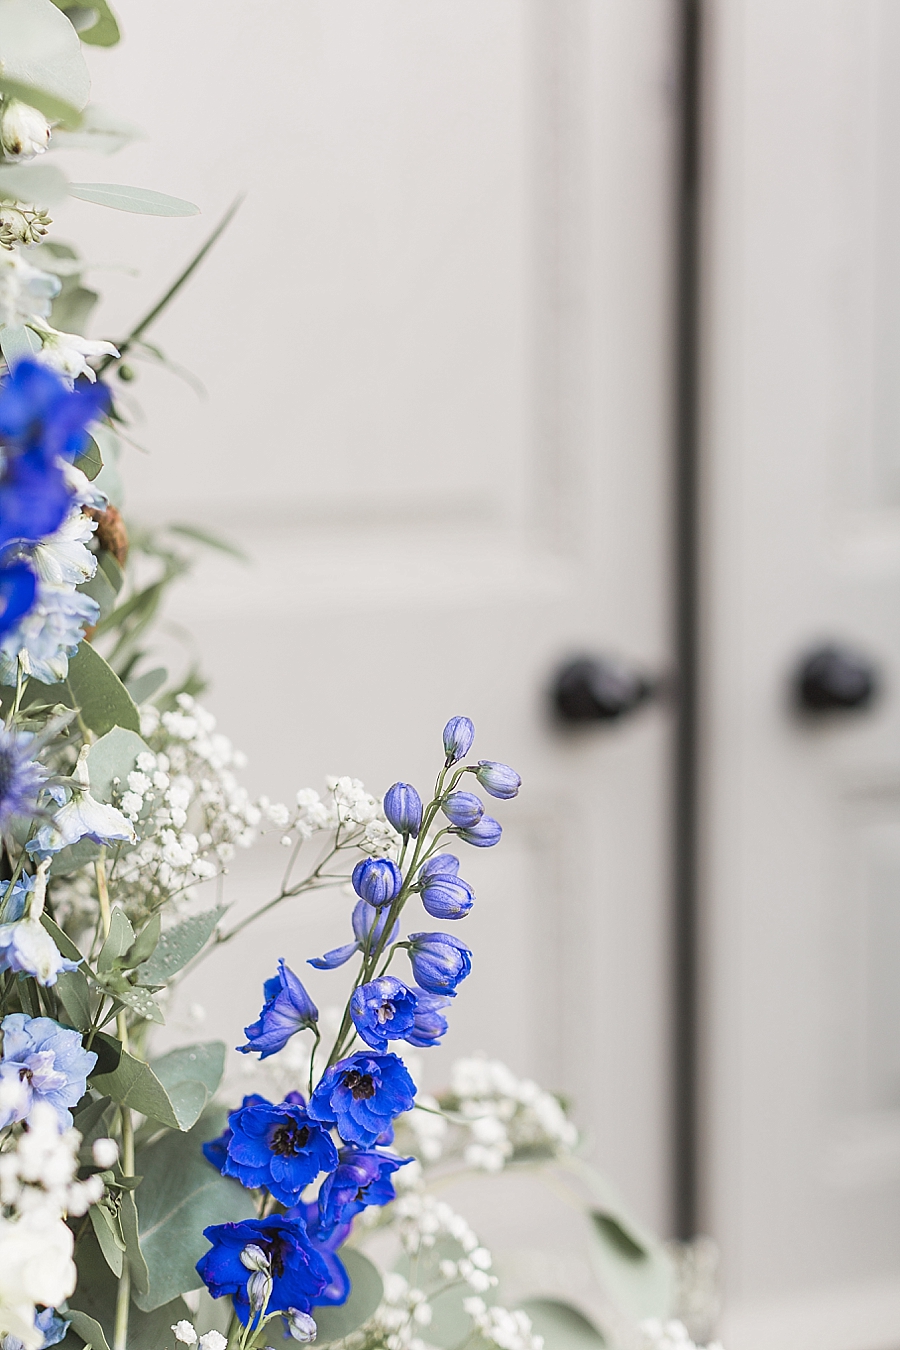 View of flowers by herefordshire flower studio and the door at letton court wedding venue herefordshire near wales by hayley morris photography